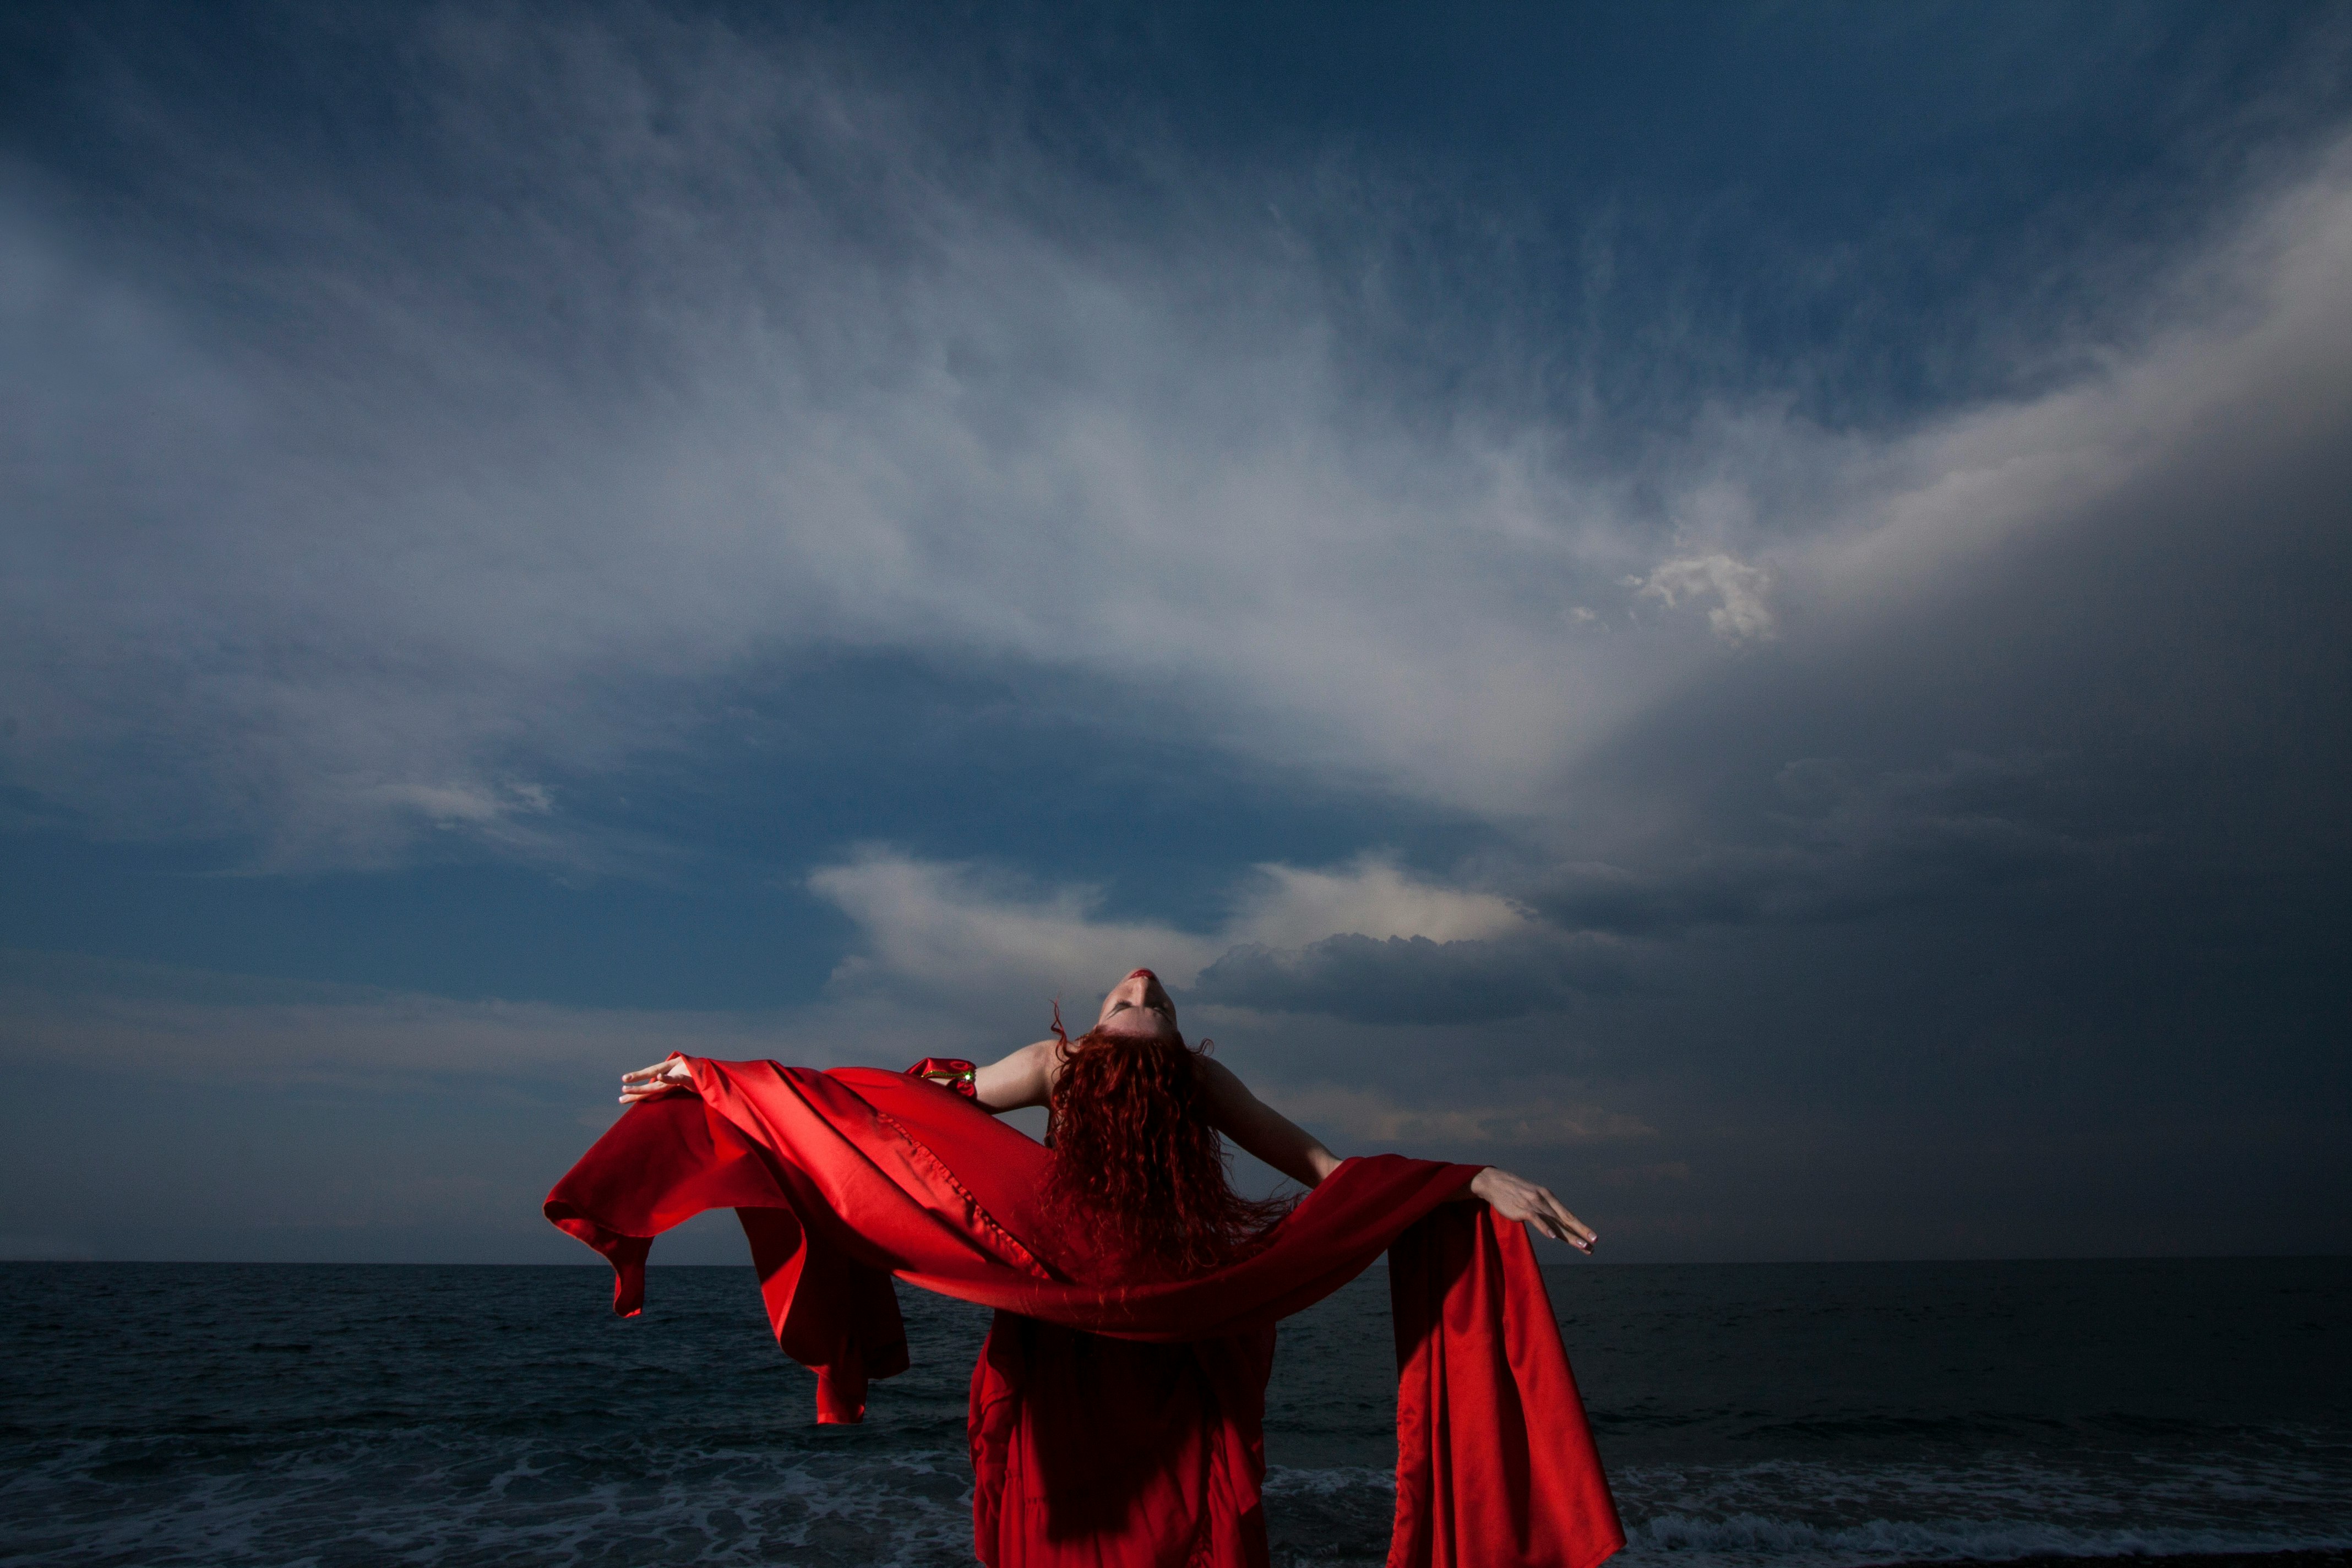 woman in red dress standing on sea shore under gray cloudy sky during daytime